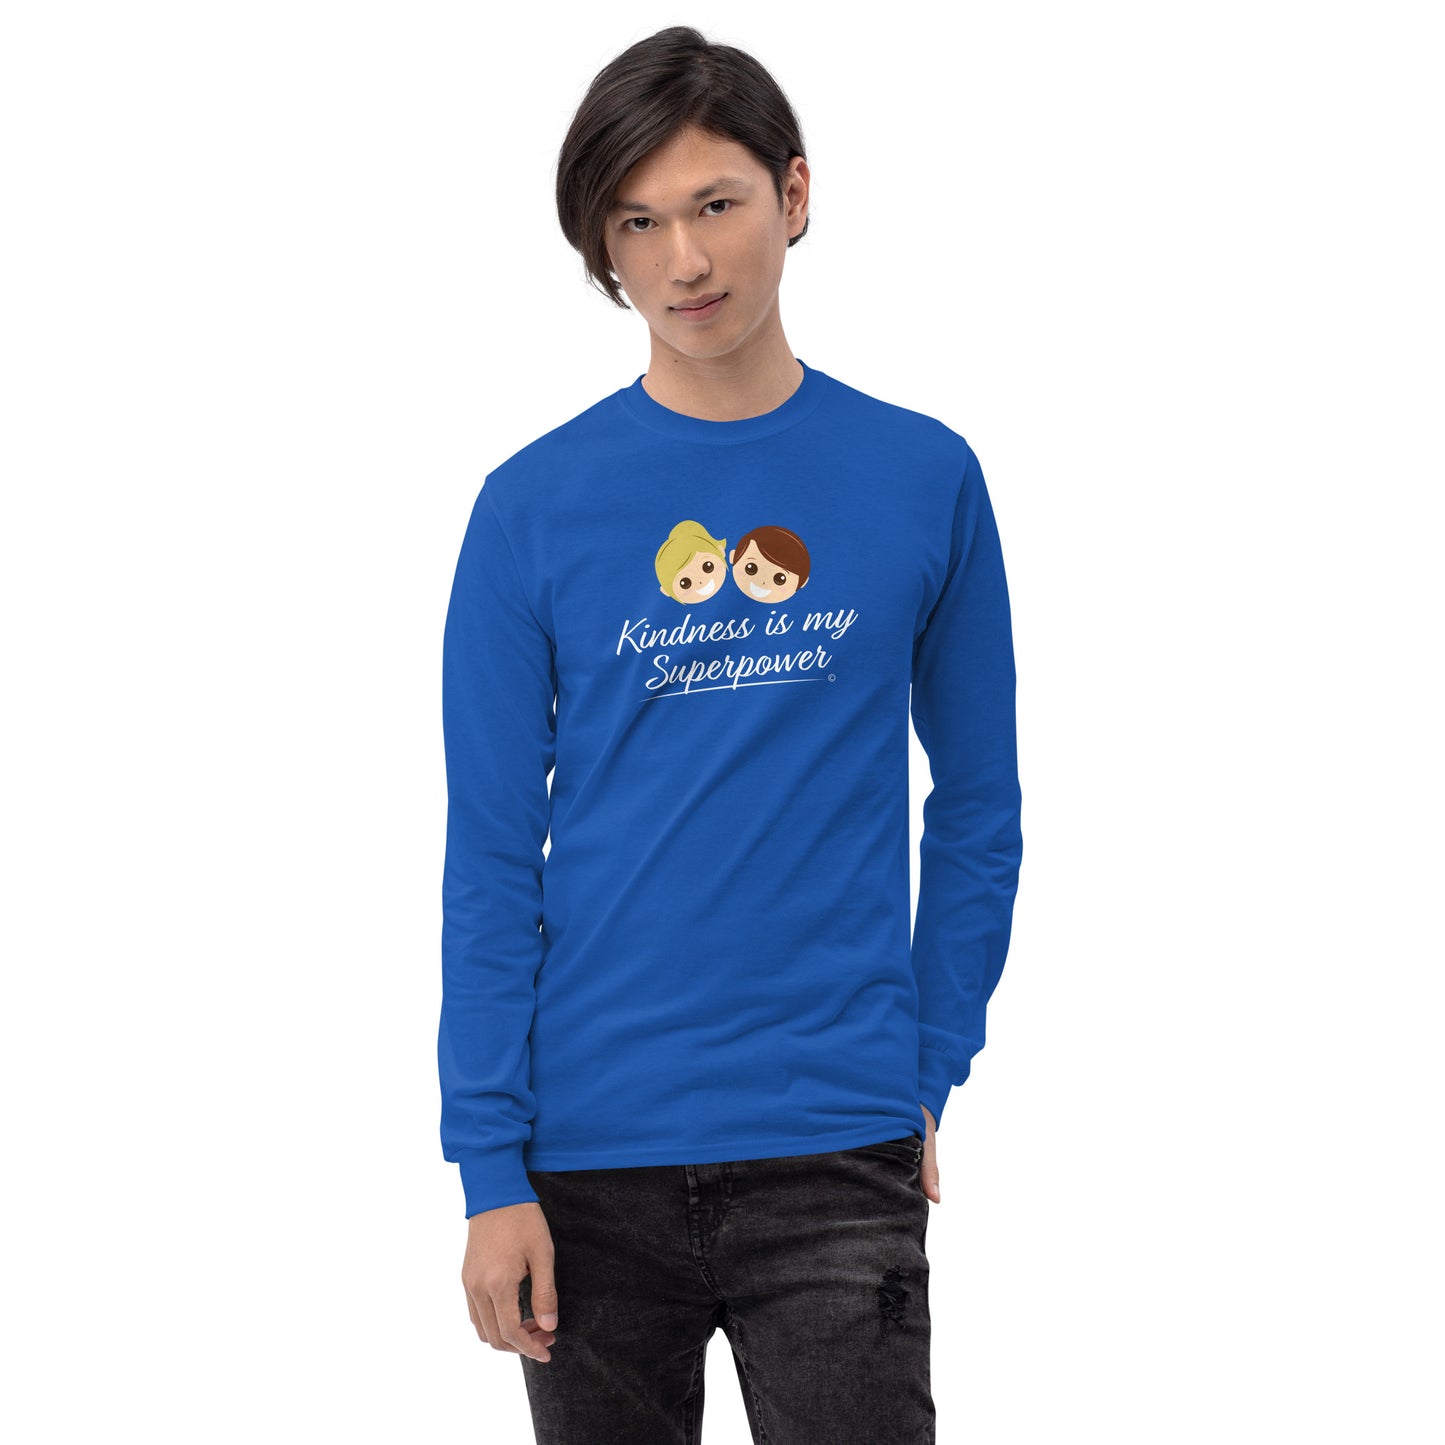 A confident young man wearing a stylish long sleeve shirt in royal blue, featuring the empowering quote 'Kindness is my Superpower' in bold lettering.